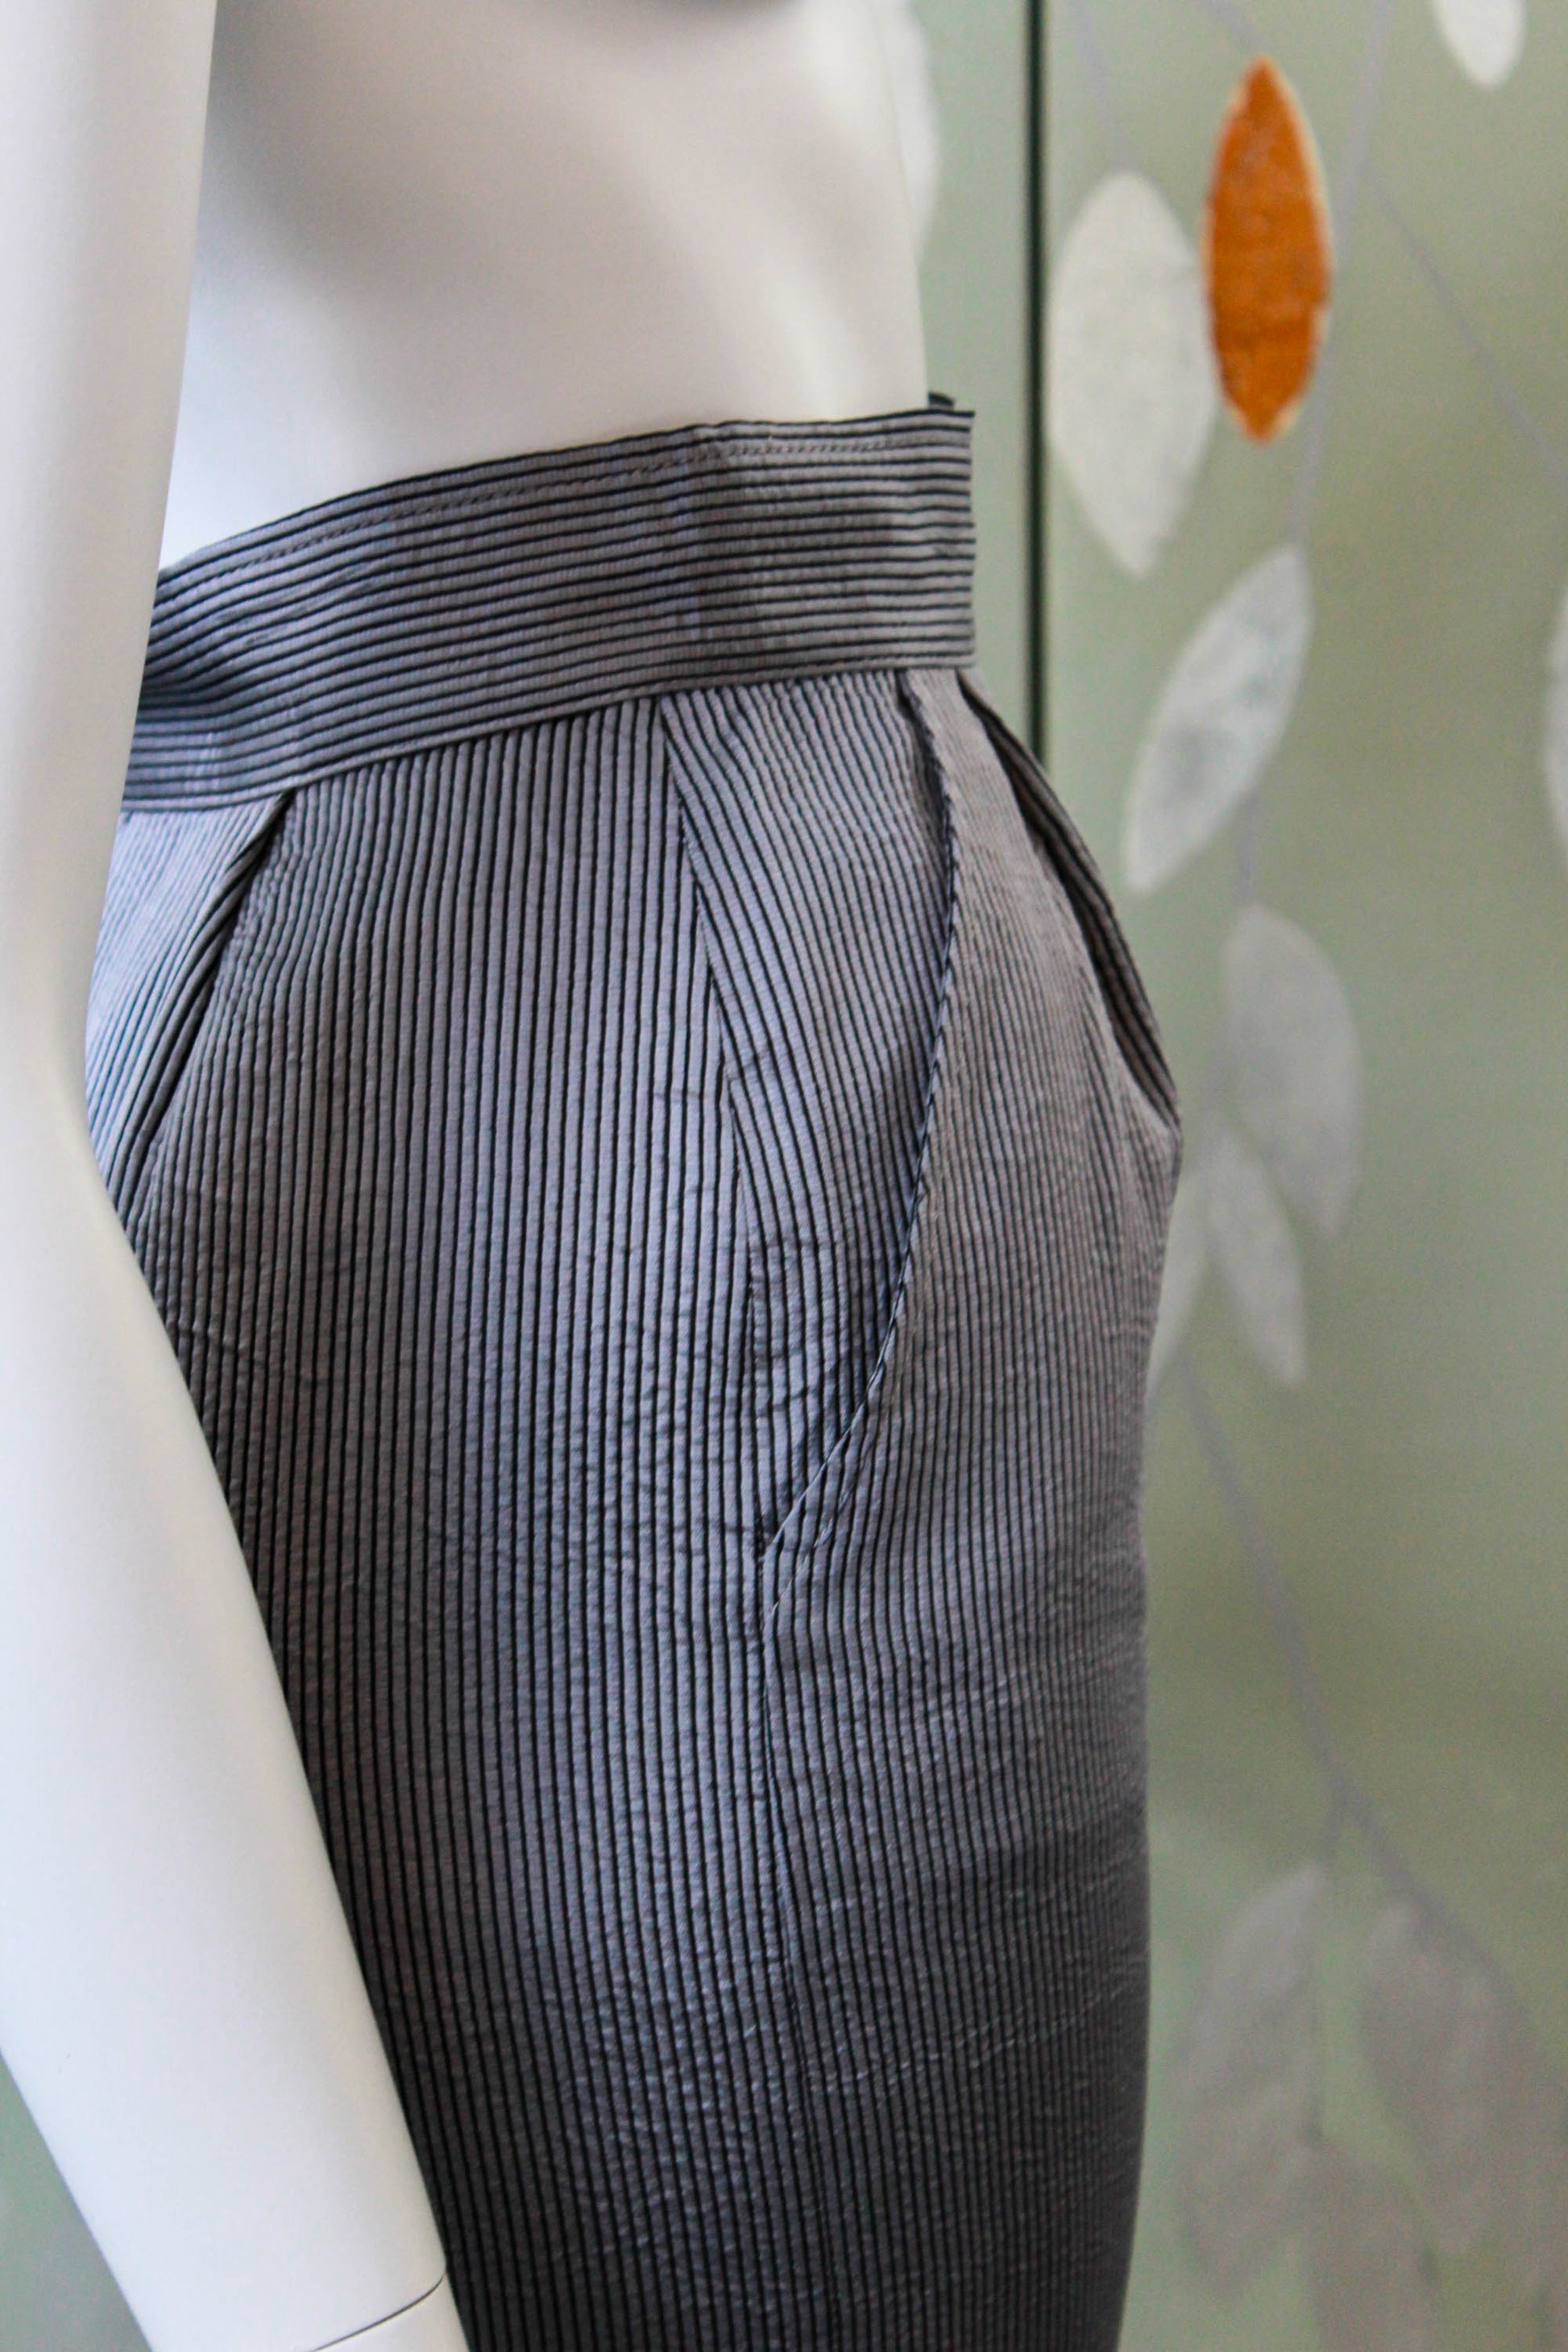 1990s harriet selling silk pencil skirt with pockets, high waisted, grey and black pinstripe